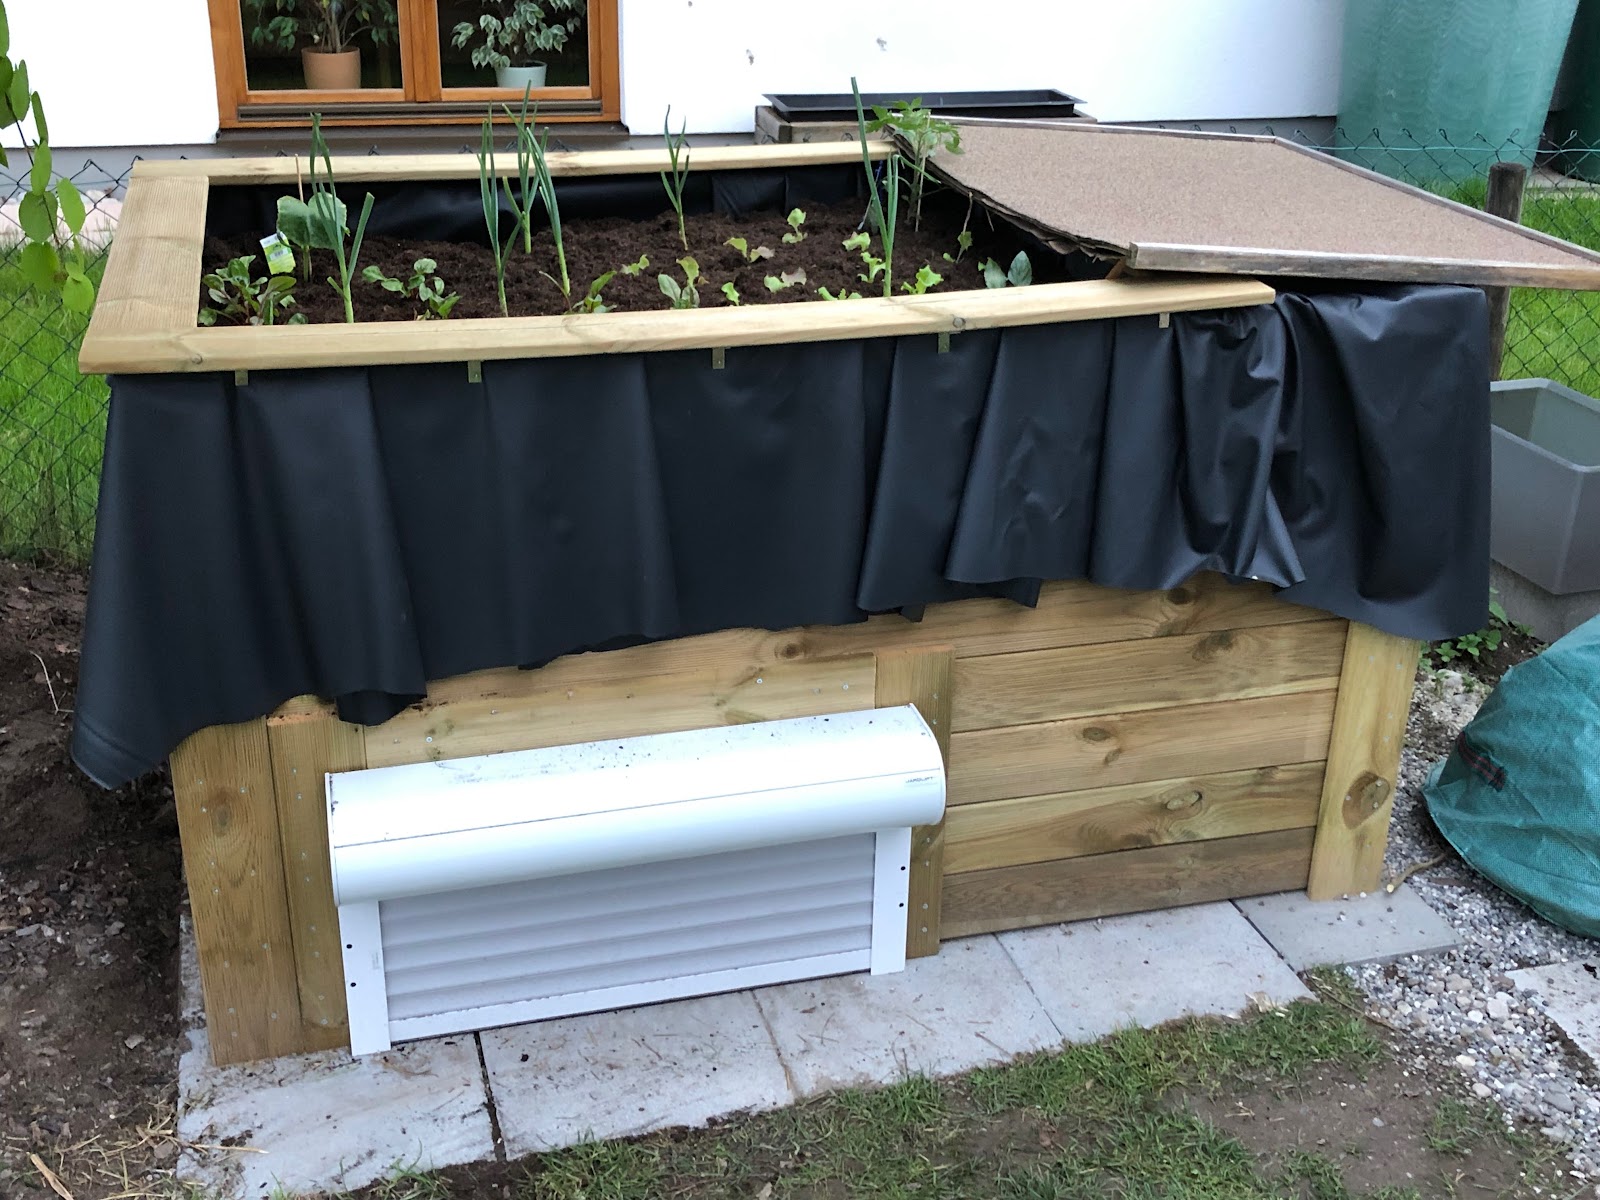 Raised bed including garage for robomower and irrigation control - Ideas &  Suggestions - Homey Community Forum